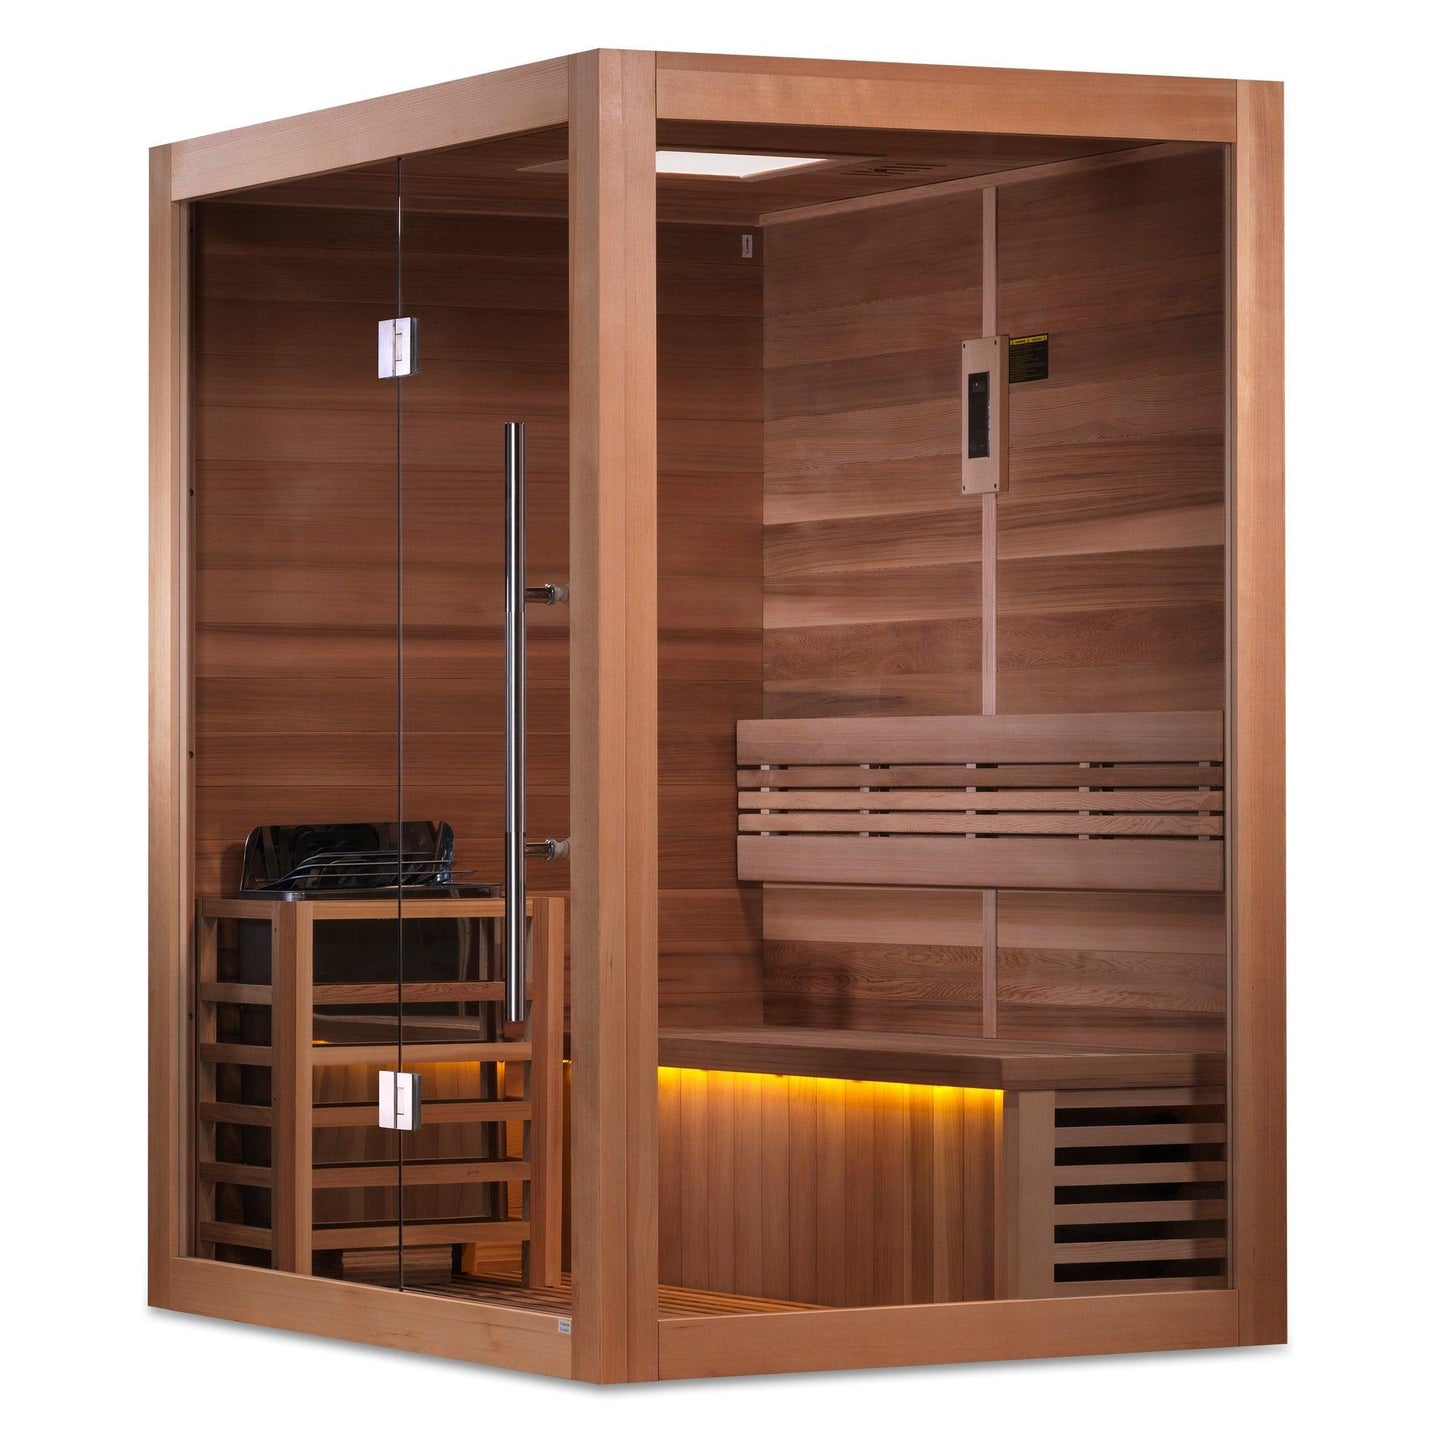 Golden Designs Hanko Edition 2-Person Indoor Traditional Steam Sauna All Glass Front and Wooden Right Side Wall in Canadian Red Cedar Interior and Hemlock Exterior